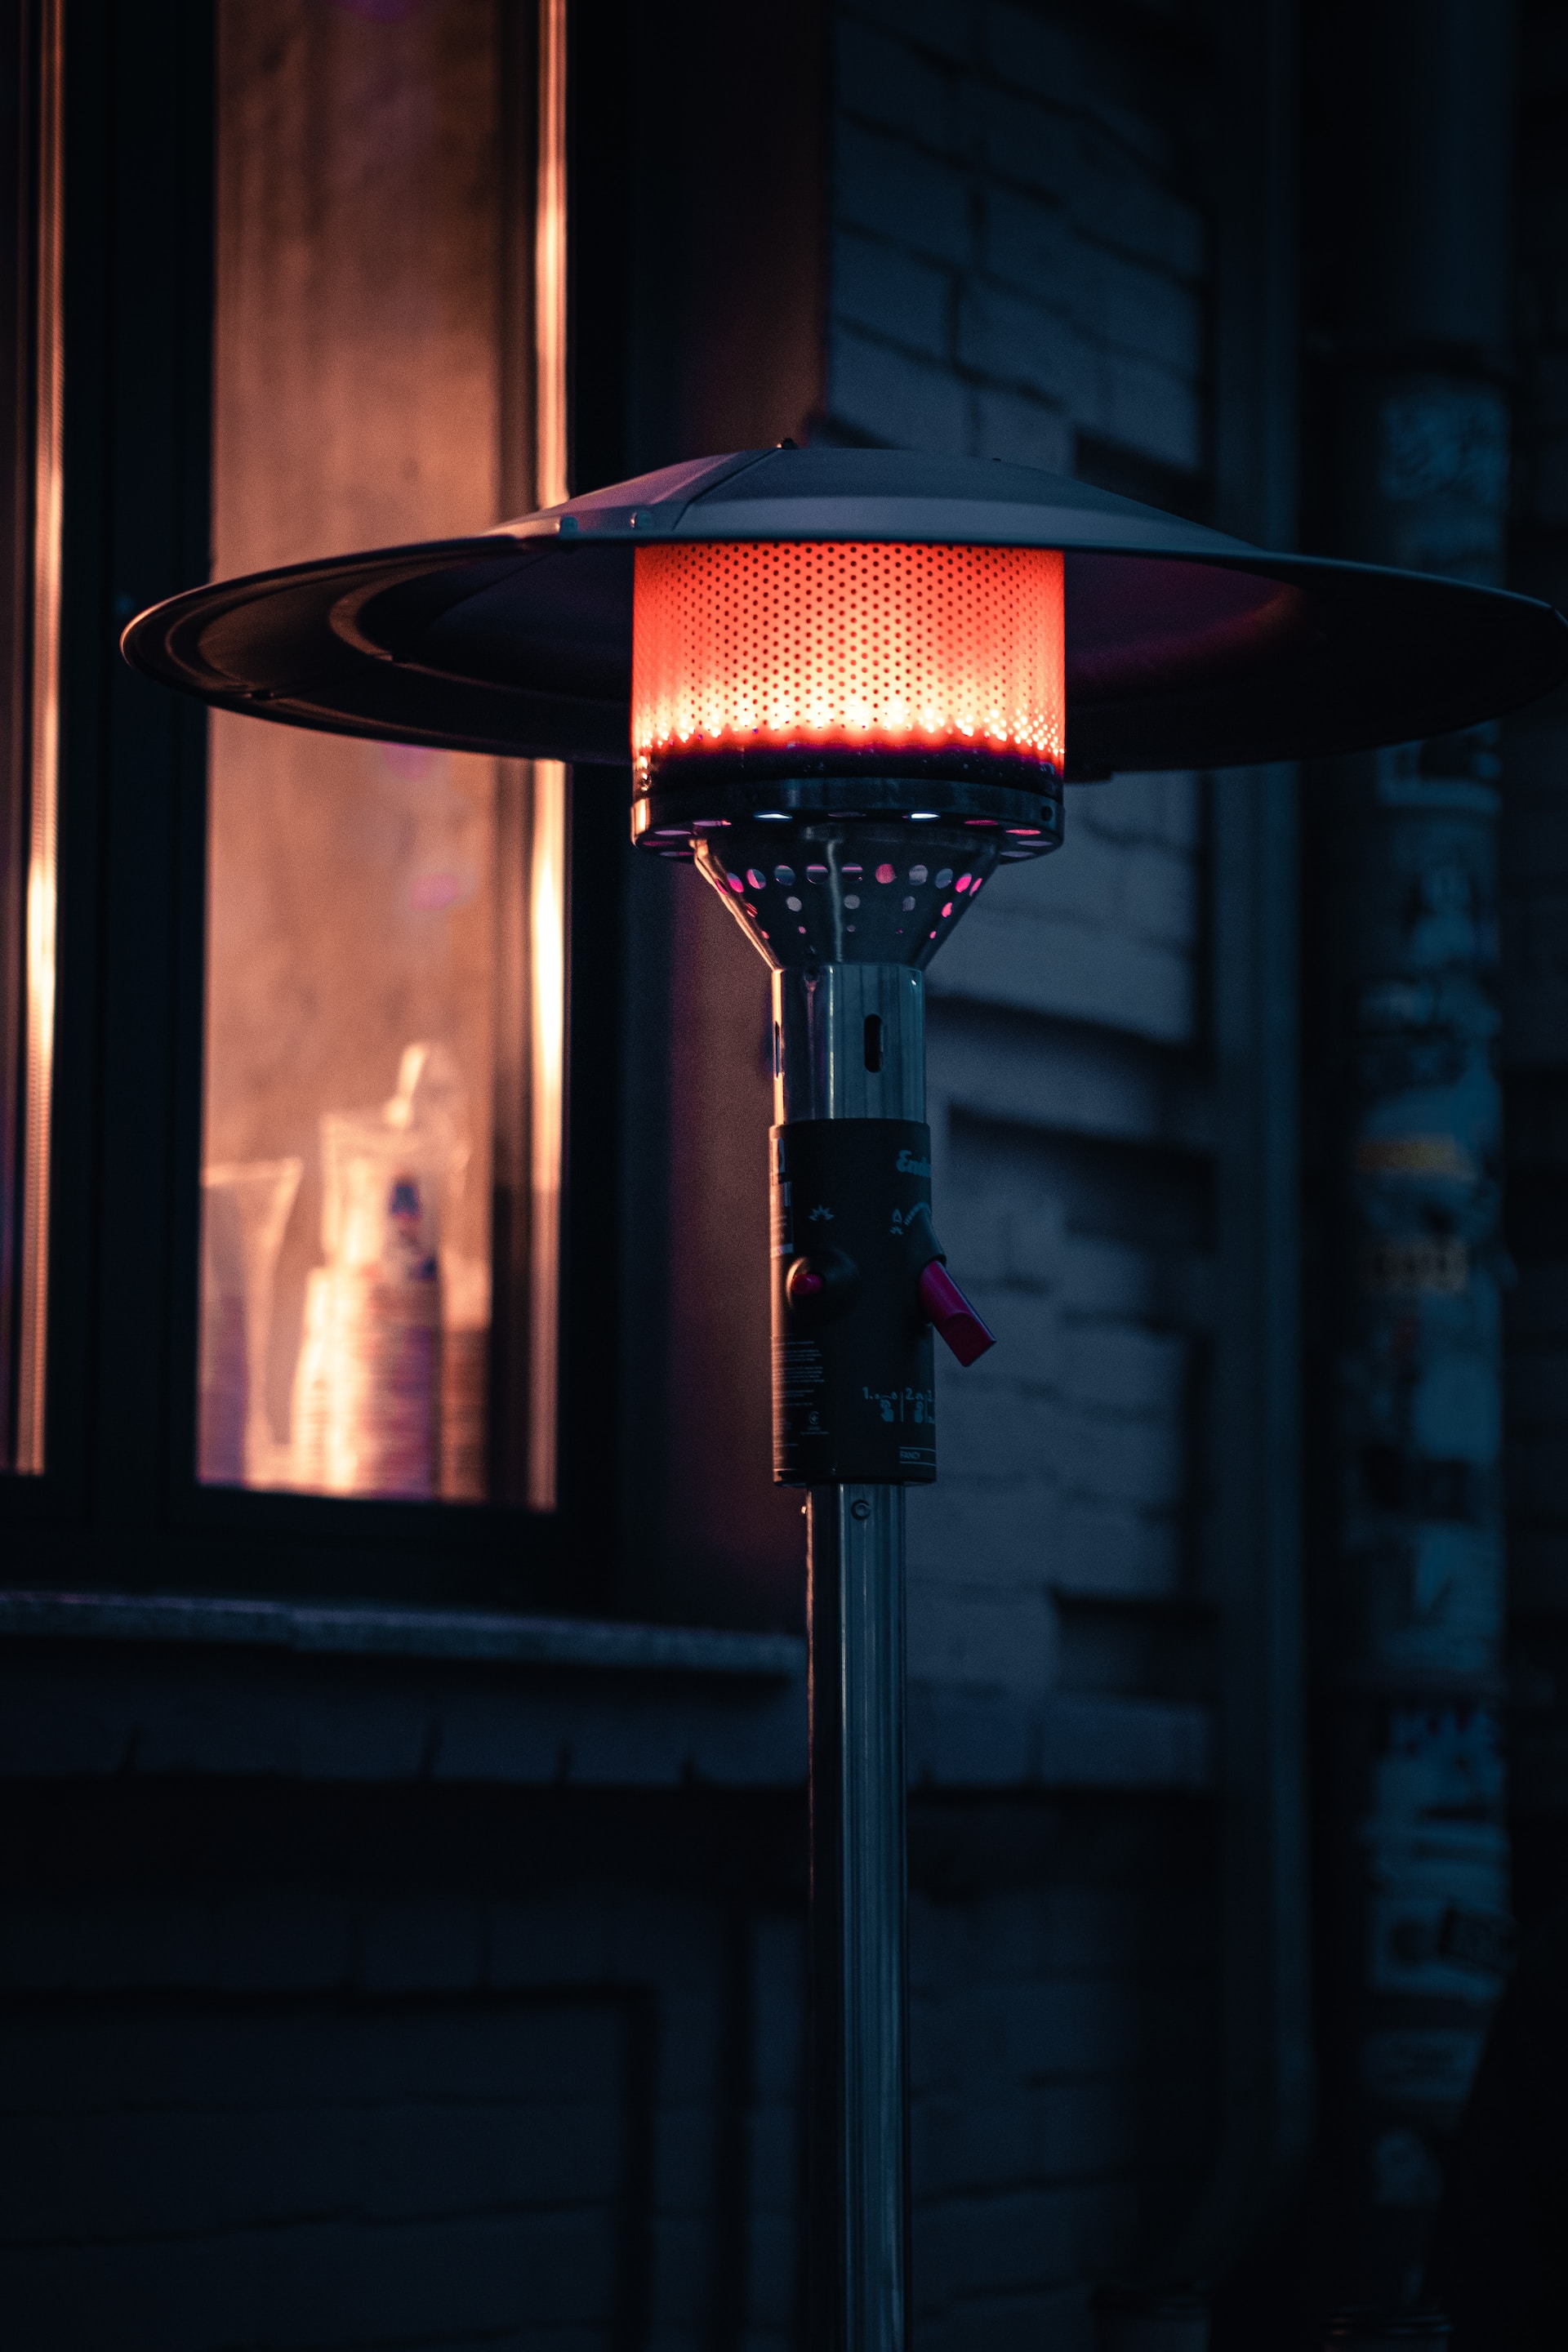 Photo of an outdoor patio heater